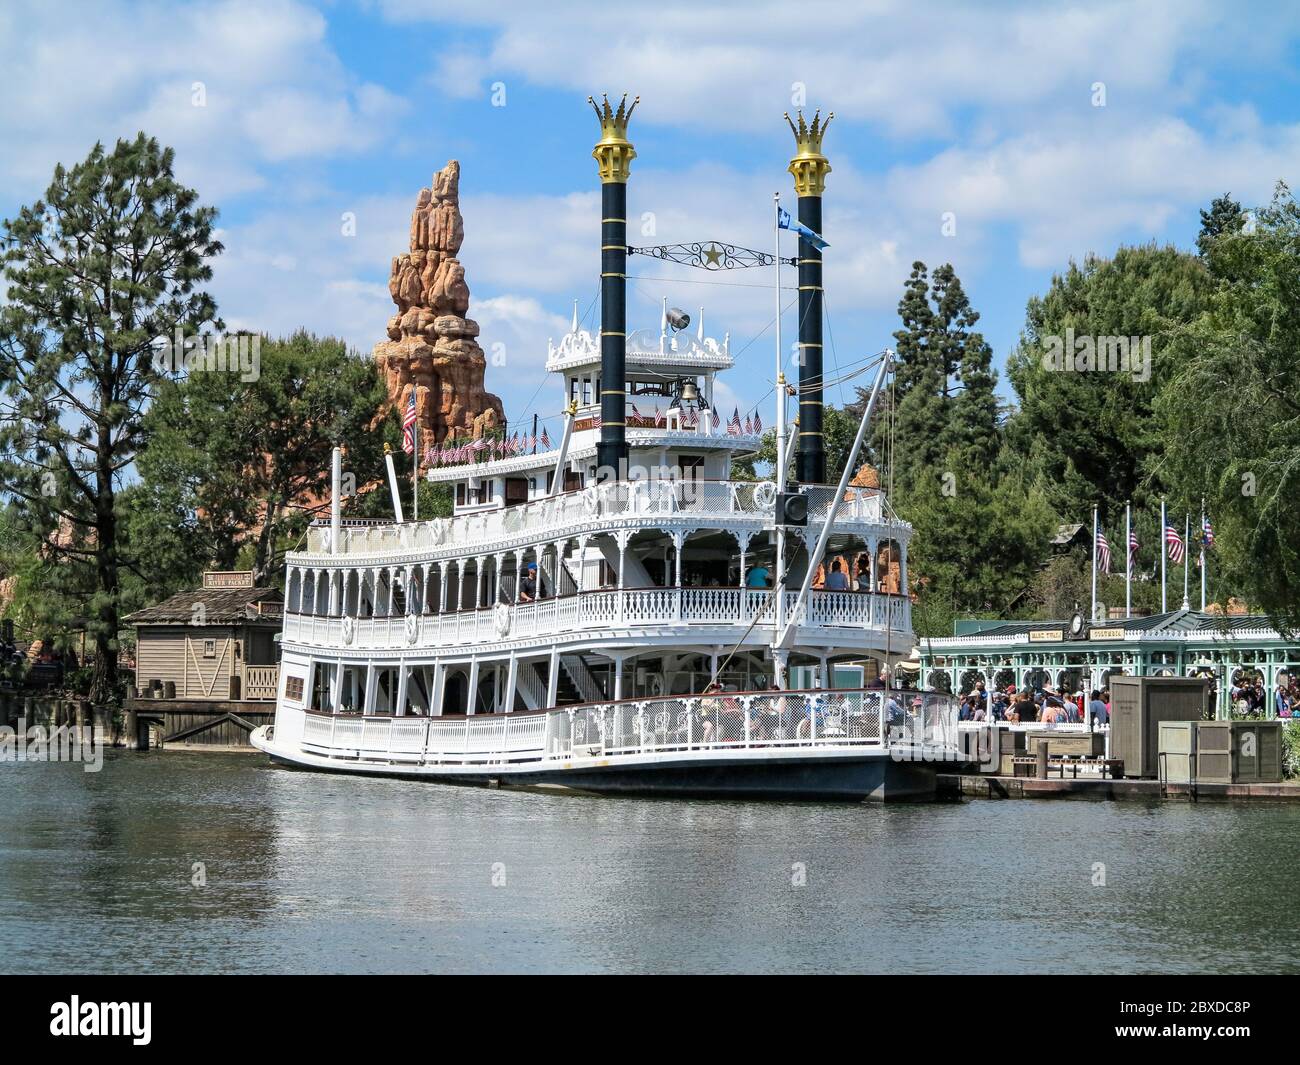 ANAHEIM, CALIFORNIA - May 25th, 2018 - Disneyland's Mark Twain Riverboat on the Rivers of America with Big Thunder Mountain behind. Stock Photo